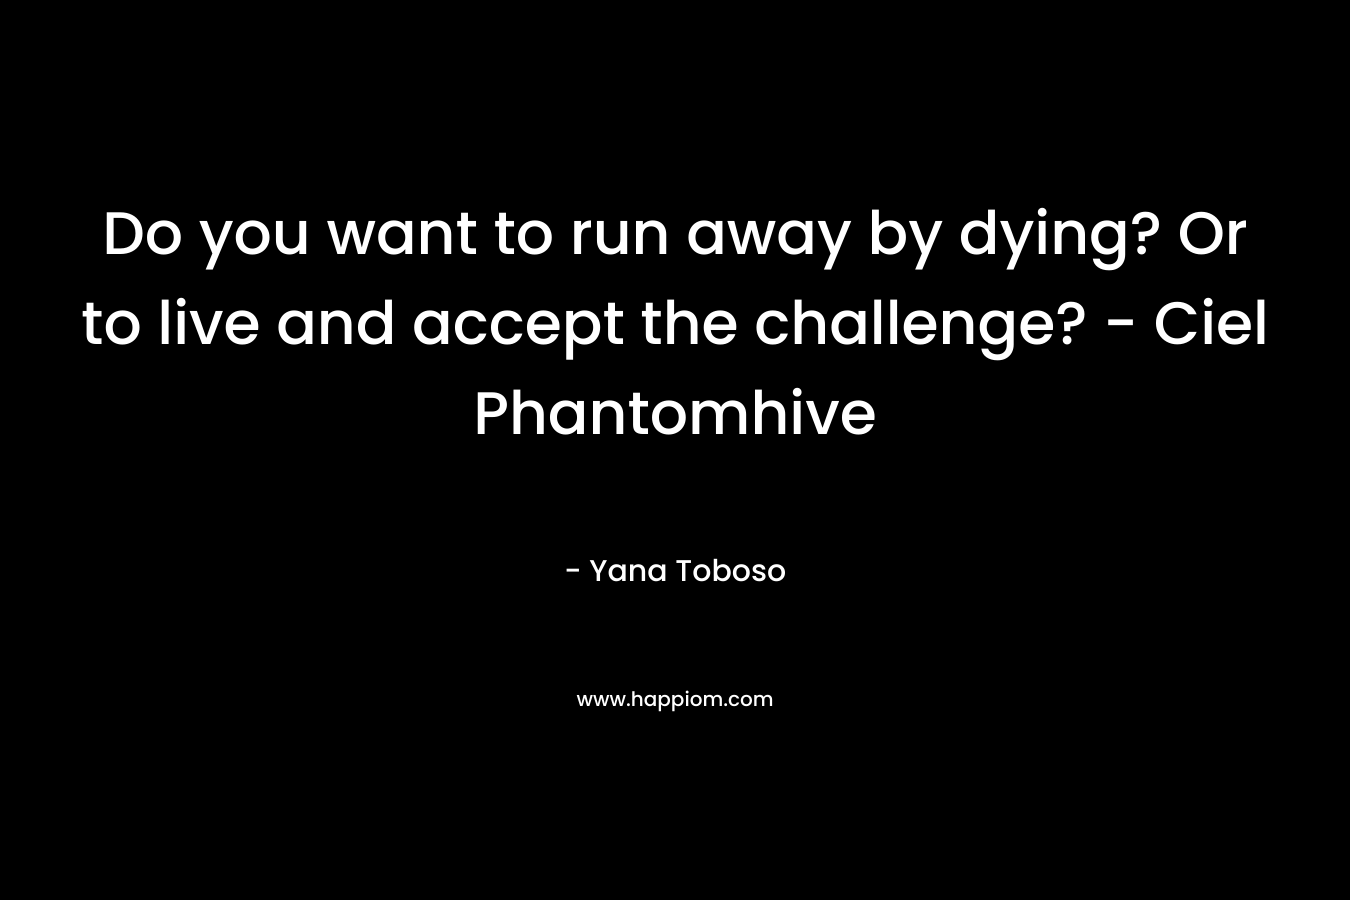 Do you want to run away by dying? Or to live and accept the challenge? - Ciel Phantomhive